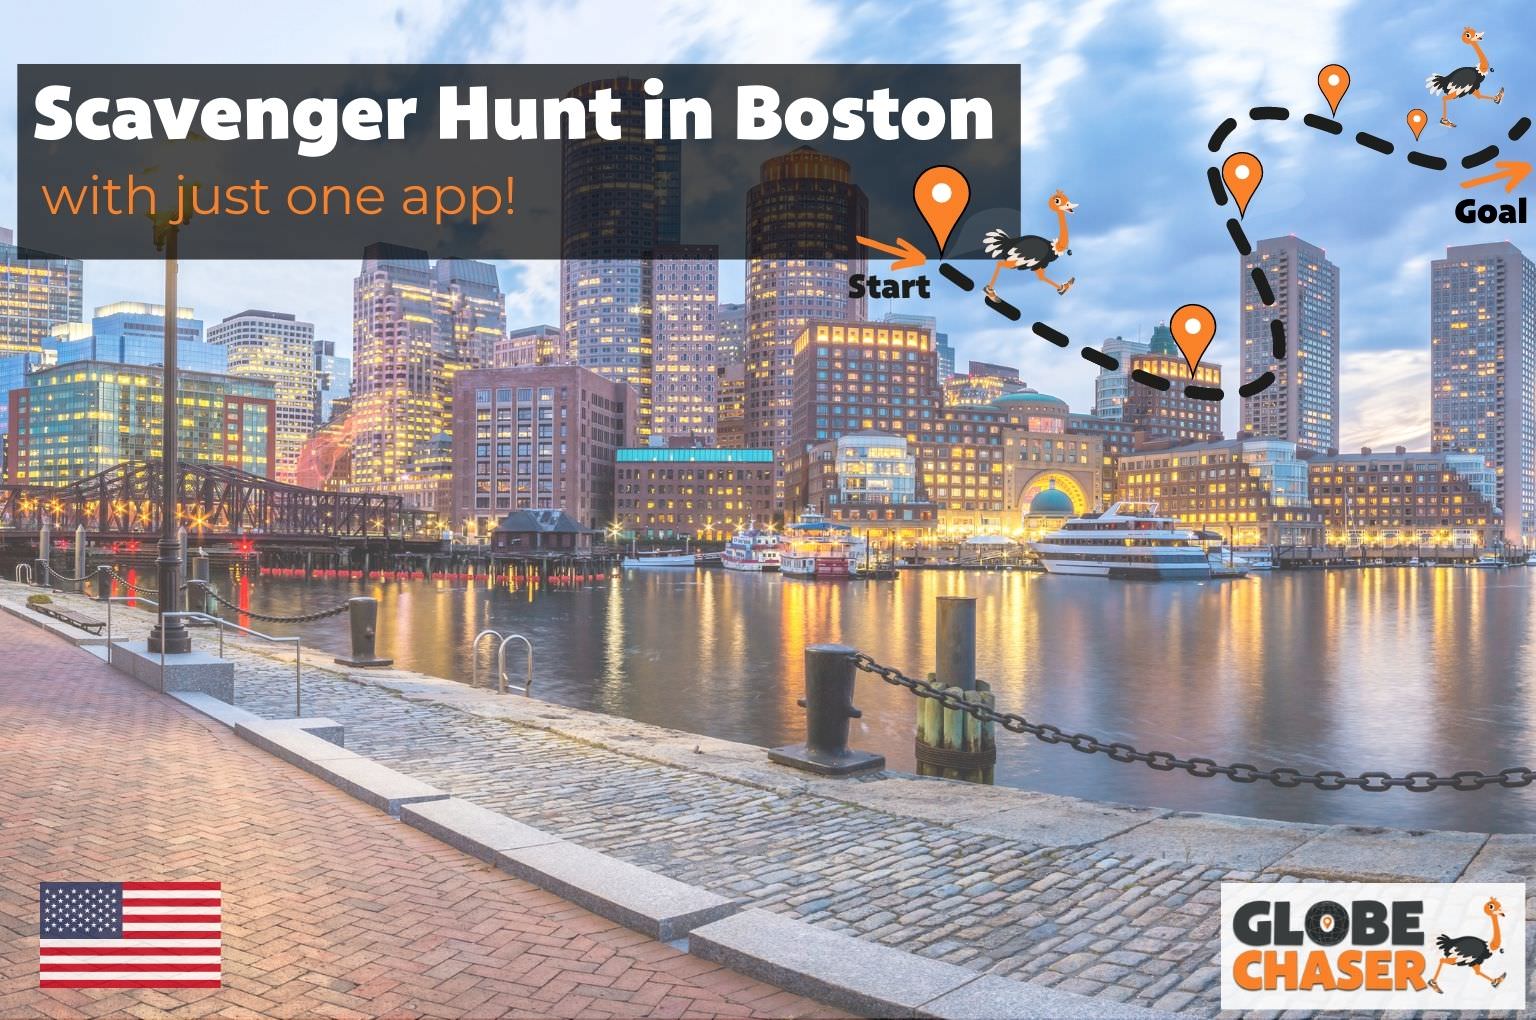 Scavenger Hunt in Boston, USA - Family Activities with the Globe Chaser App for Outdoor Fun